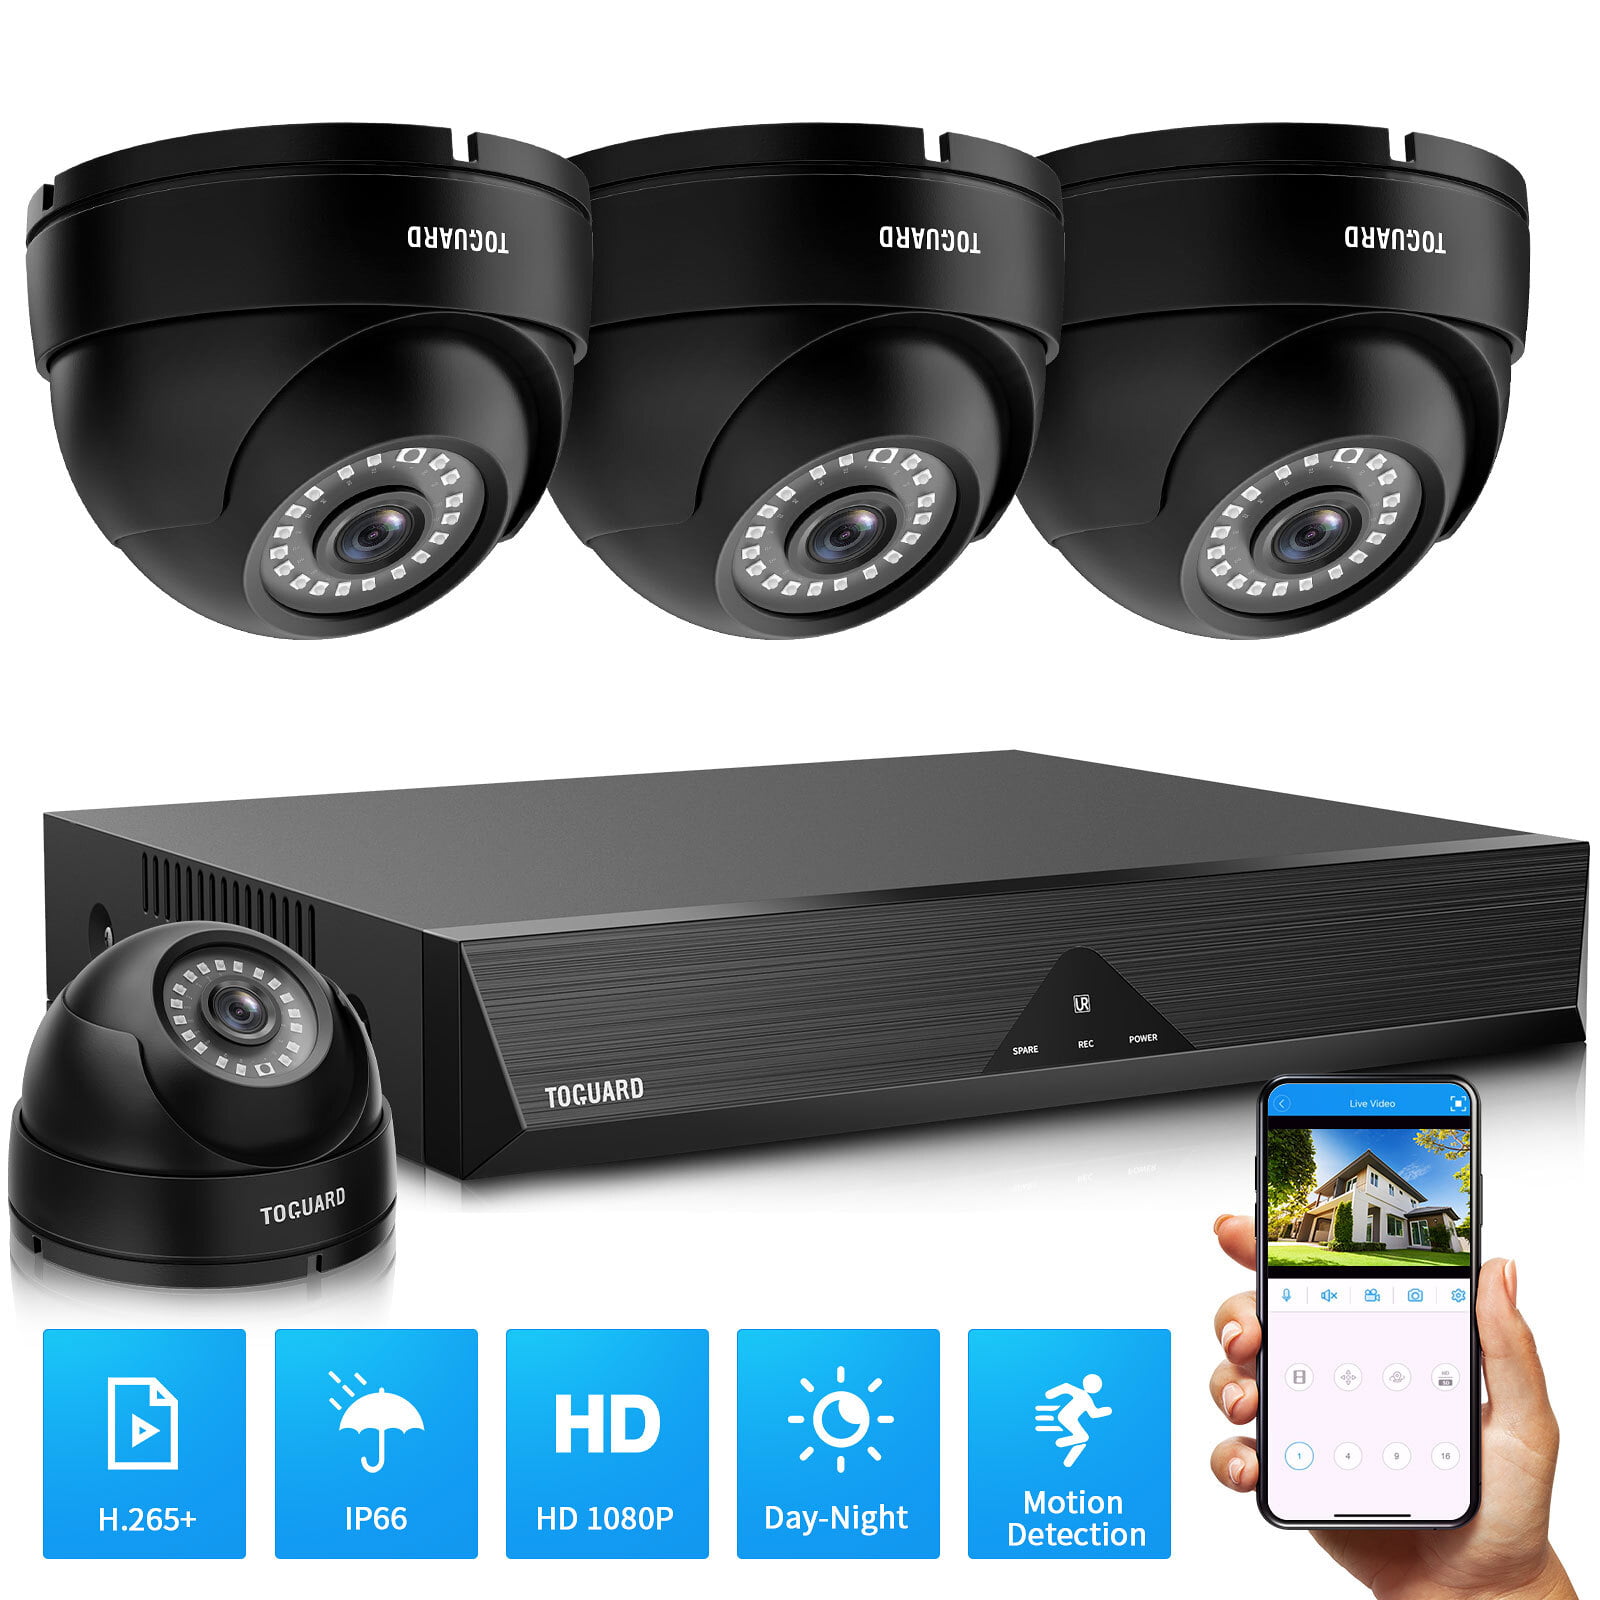 8CH 5MP-Lite DVR 4Pcs 1920TVL Outdoor Wired CCTV Camera with Night Vision No Hard Drive Motion Alert HeimVision HM245 1080P Security Camera System 